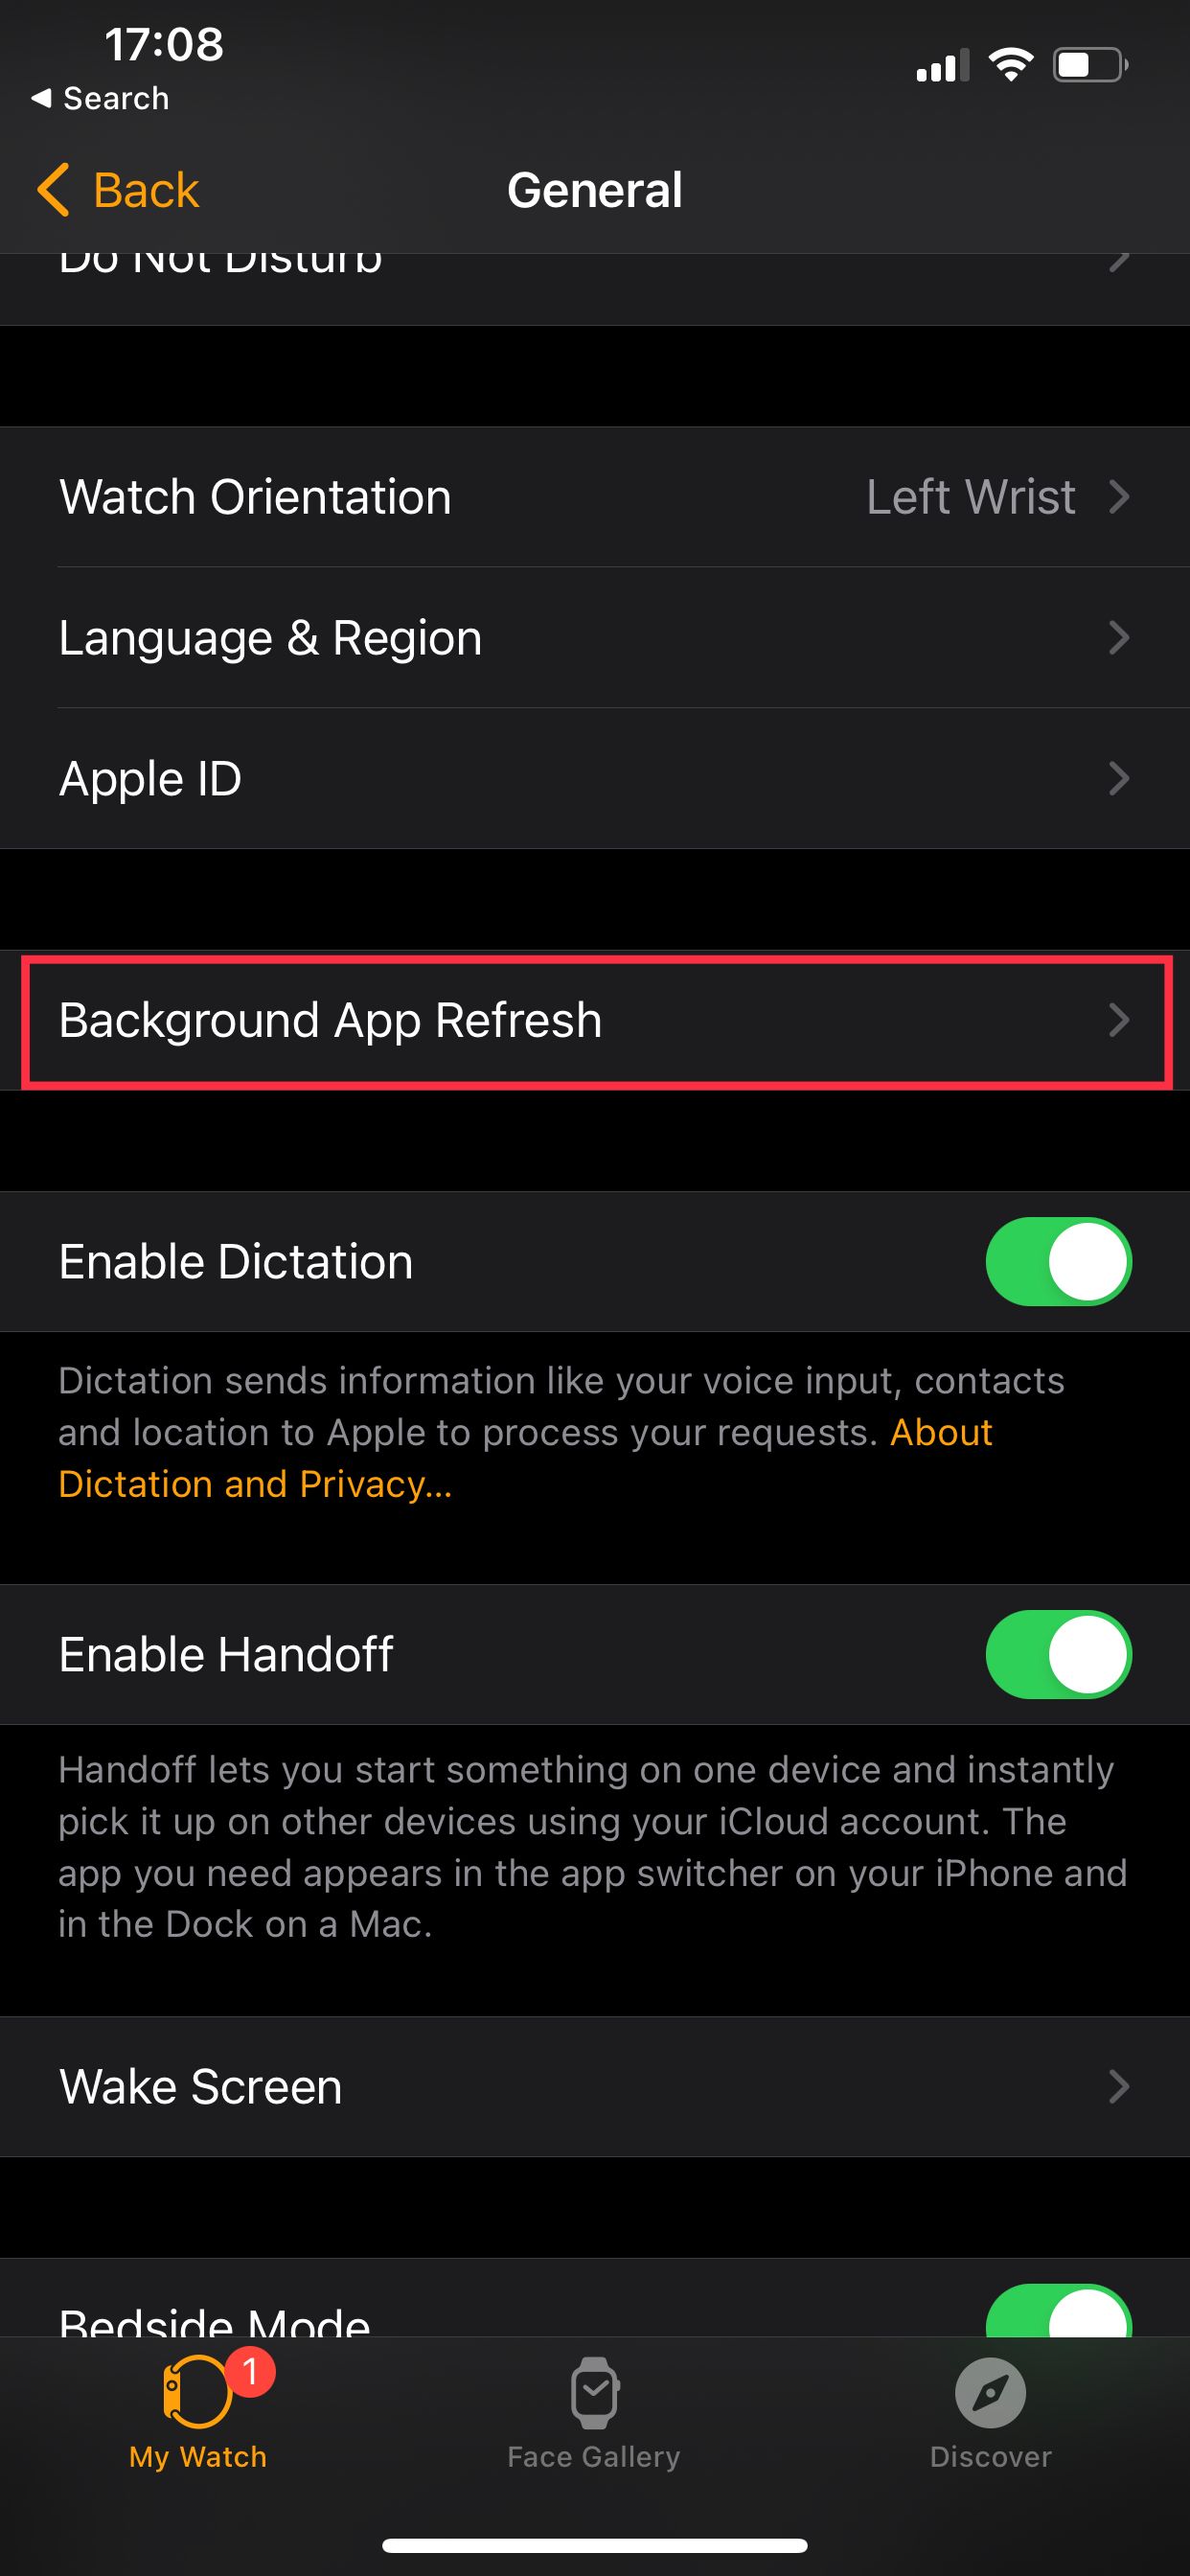 Background app refresh settings on the Watch app on iPhone